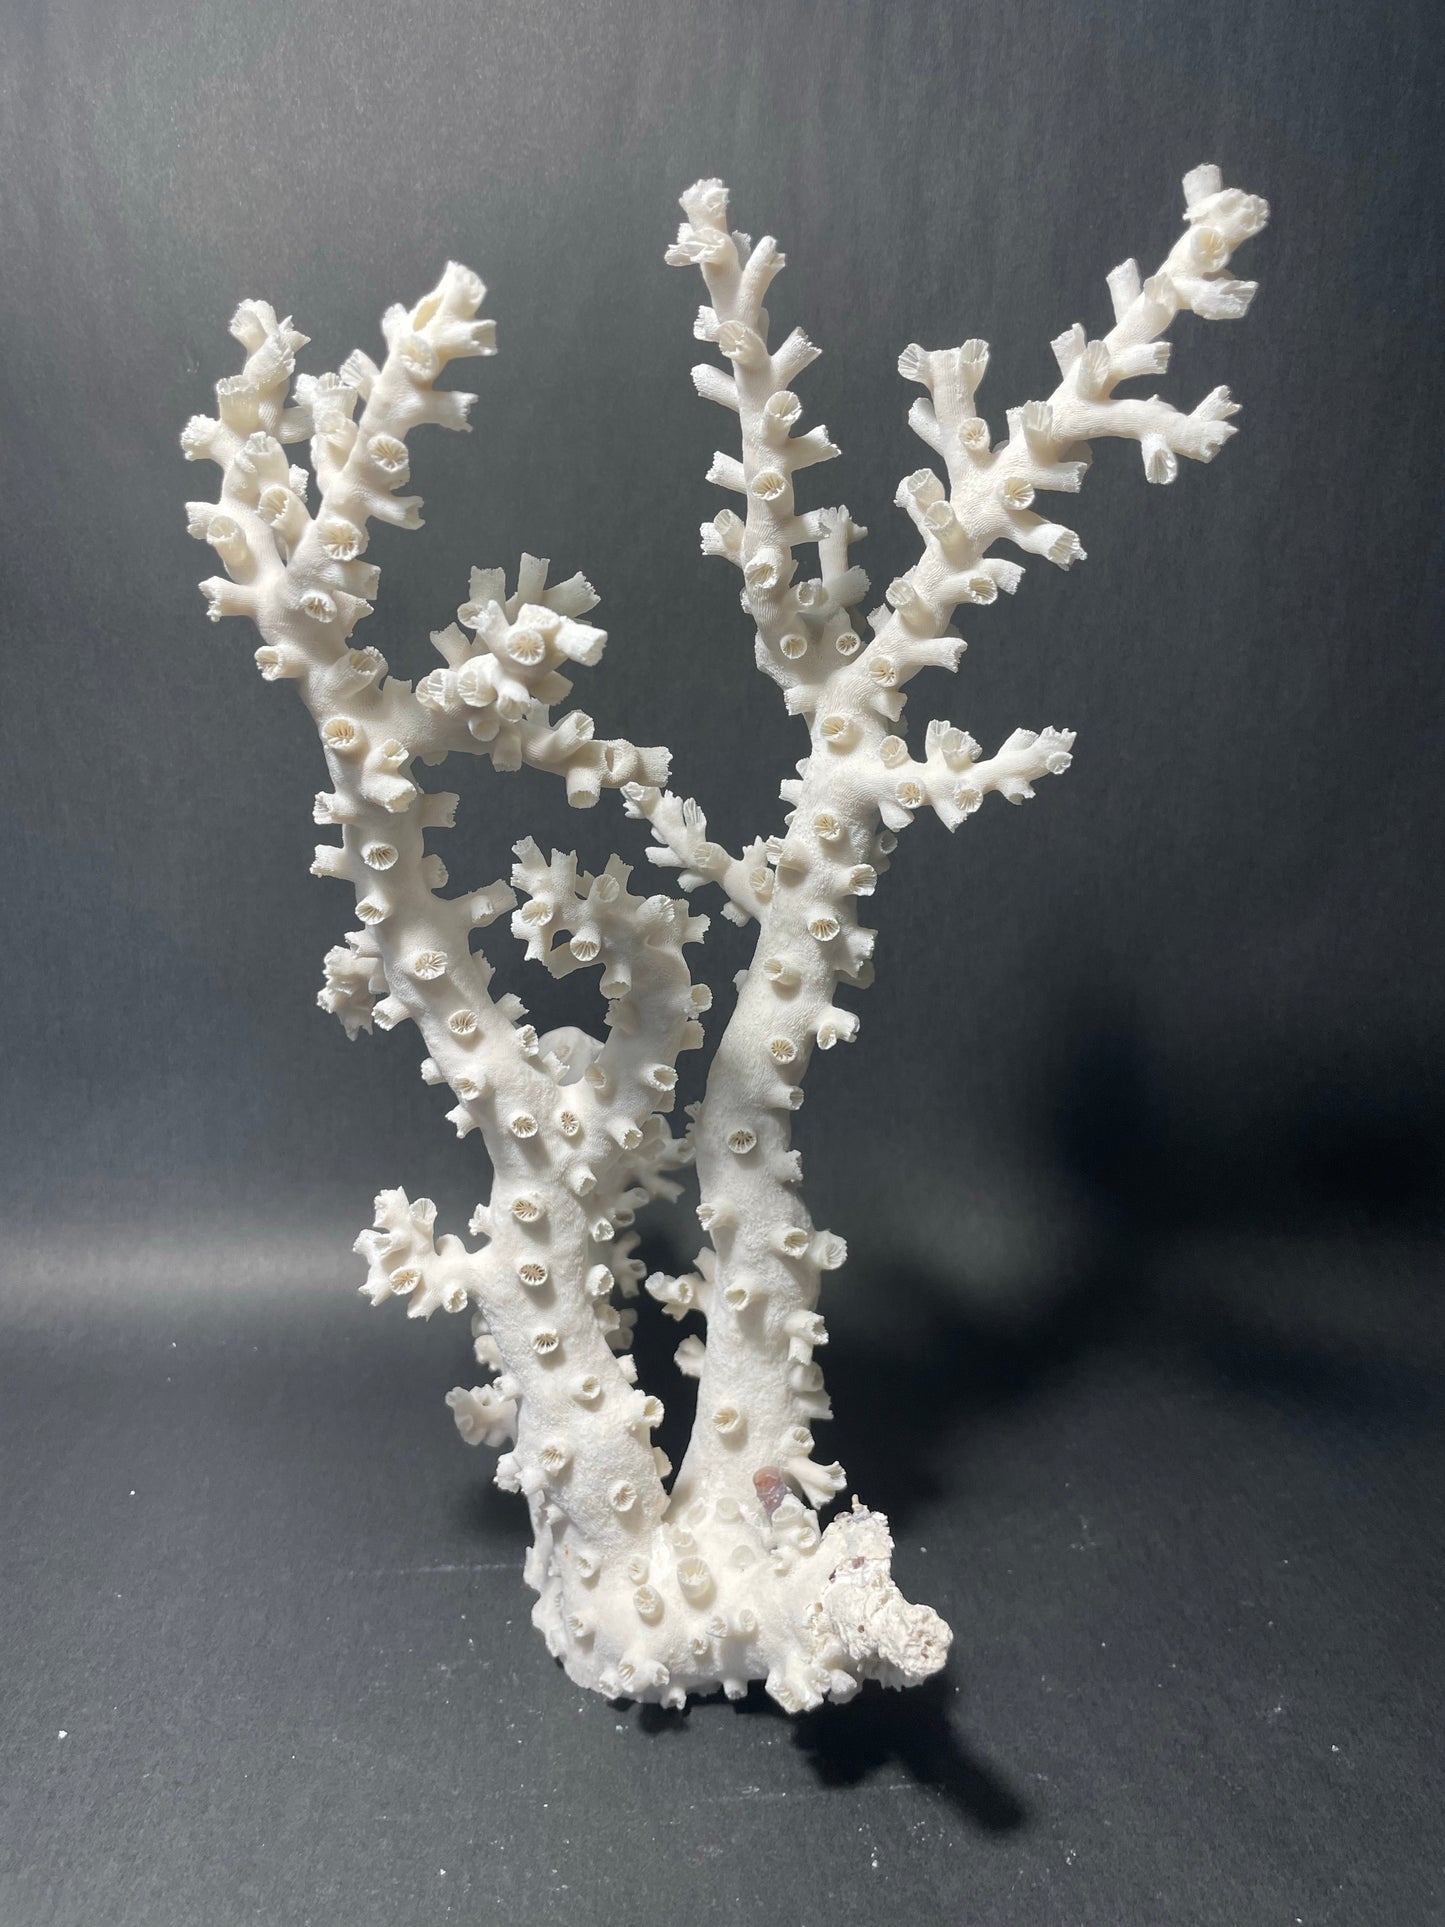 Octopus Coral (12”x8”x8”)